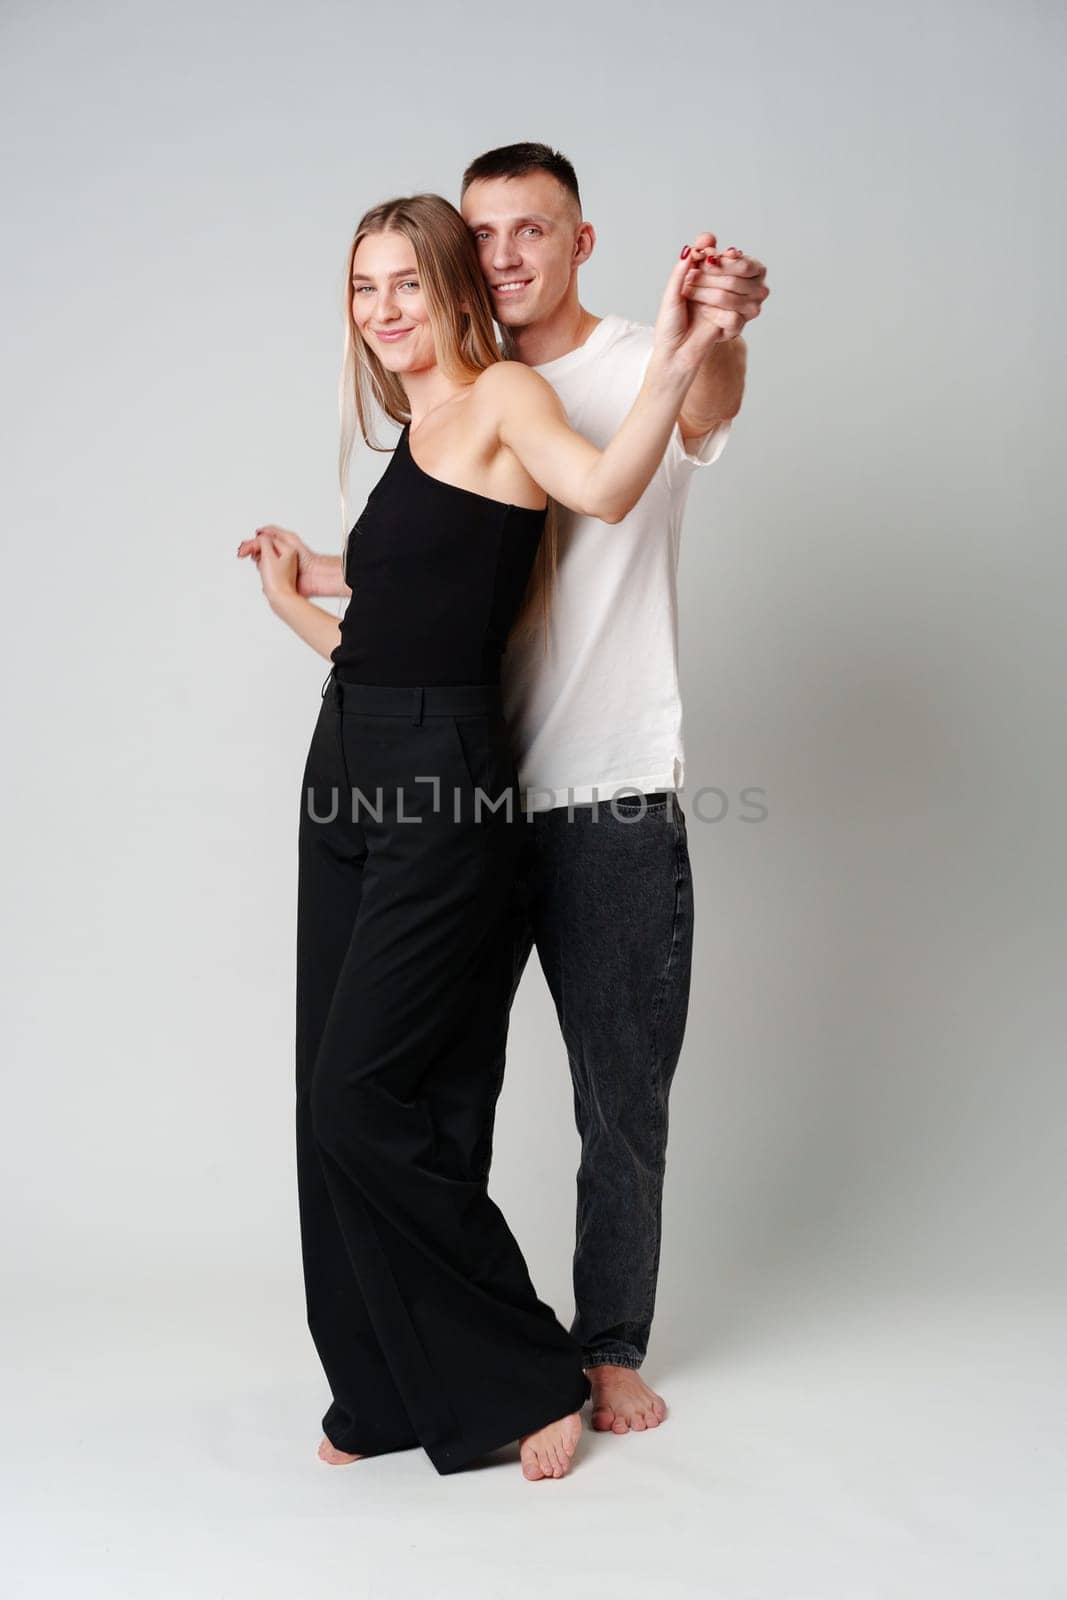 A Man and a Woman Standing Next to Each Other in studio posing